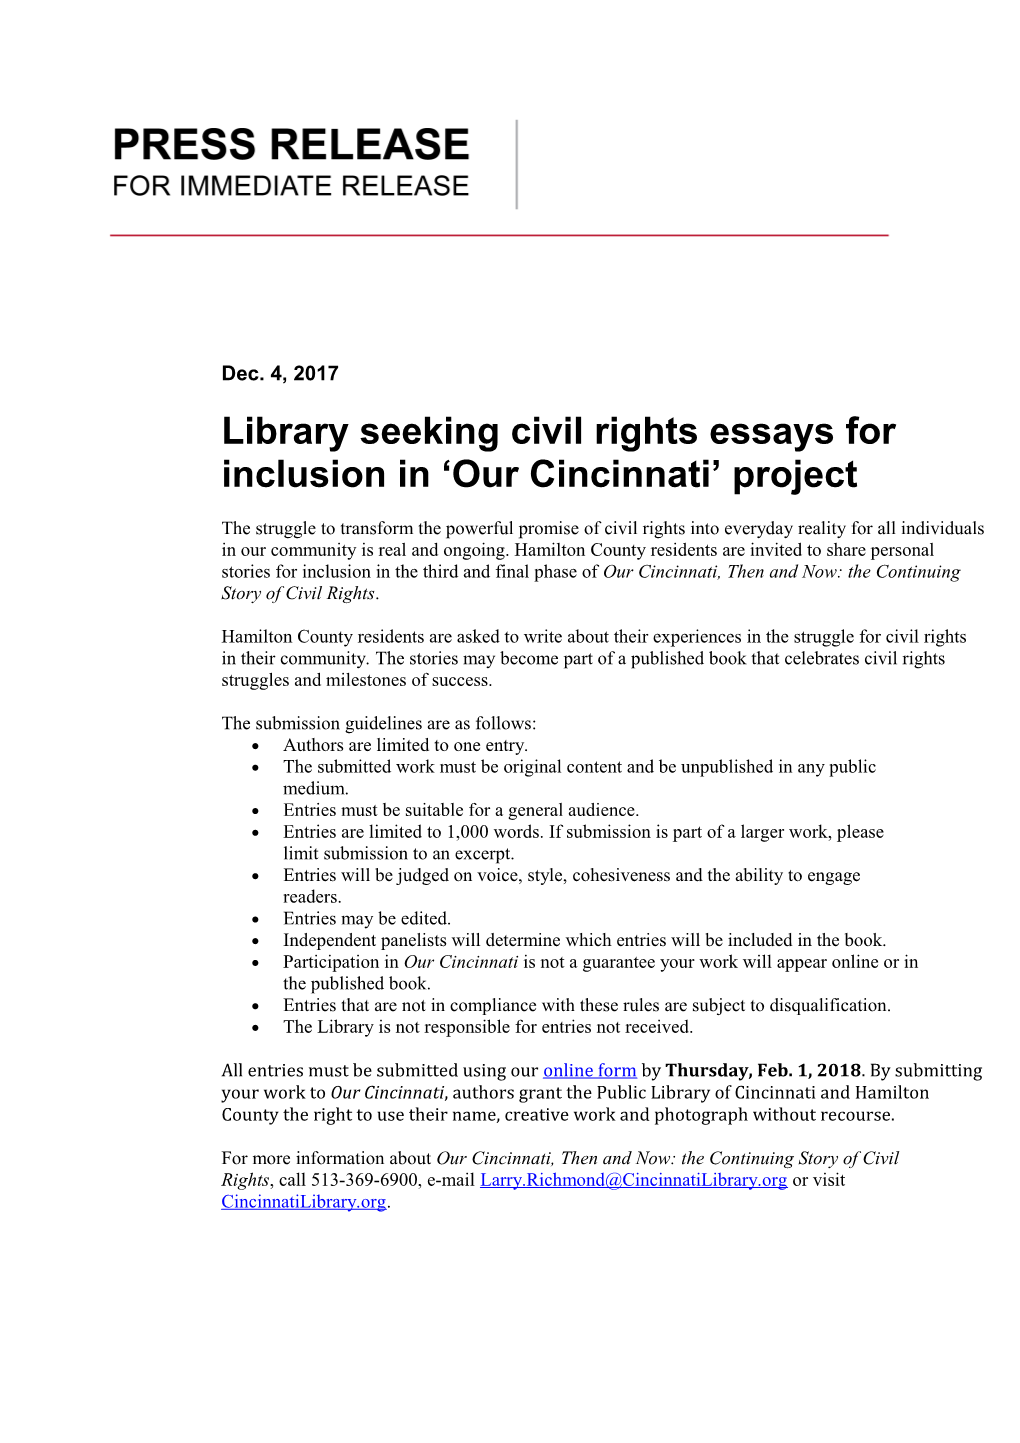 Library Seeking Civil Rights Essays for Inclusion in Our Cincinnati Project